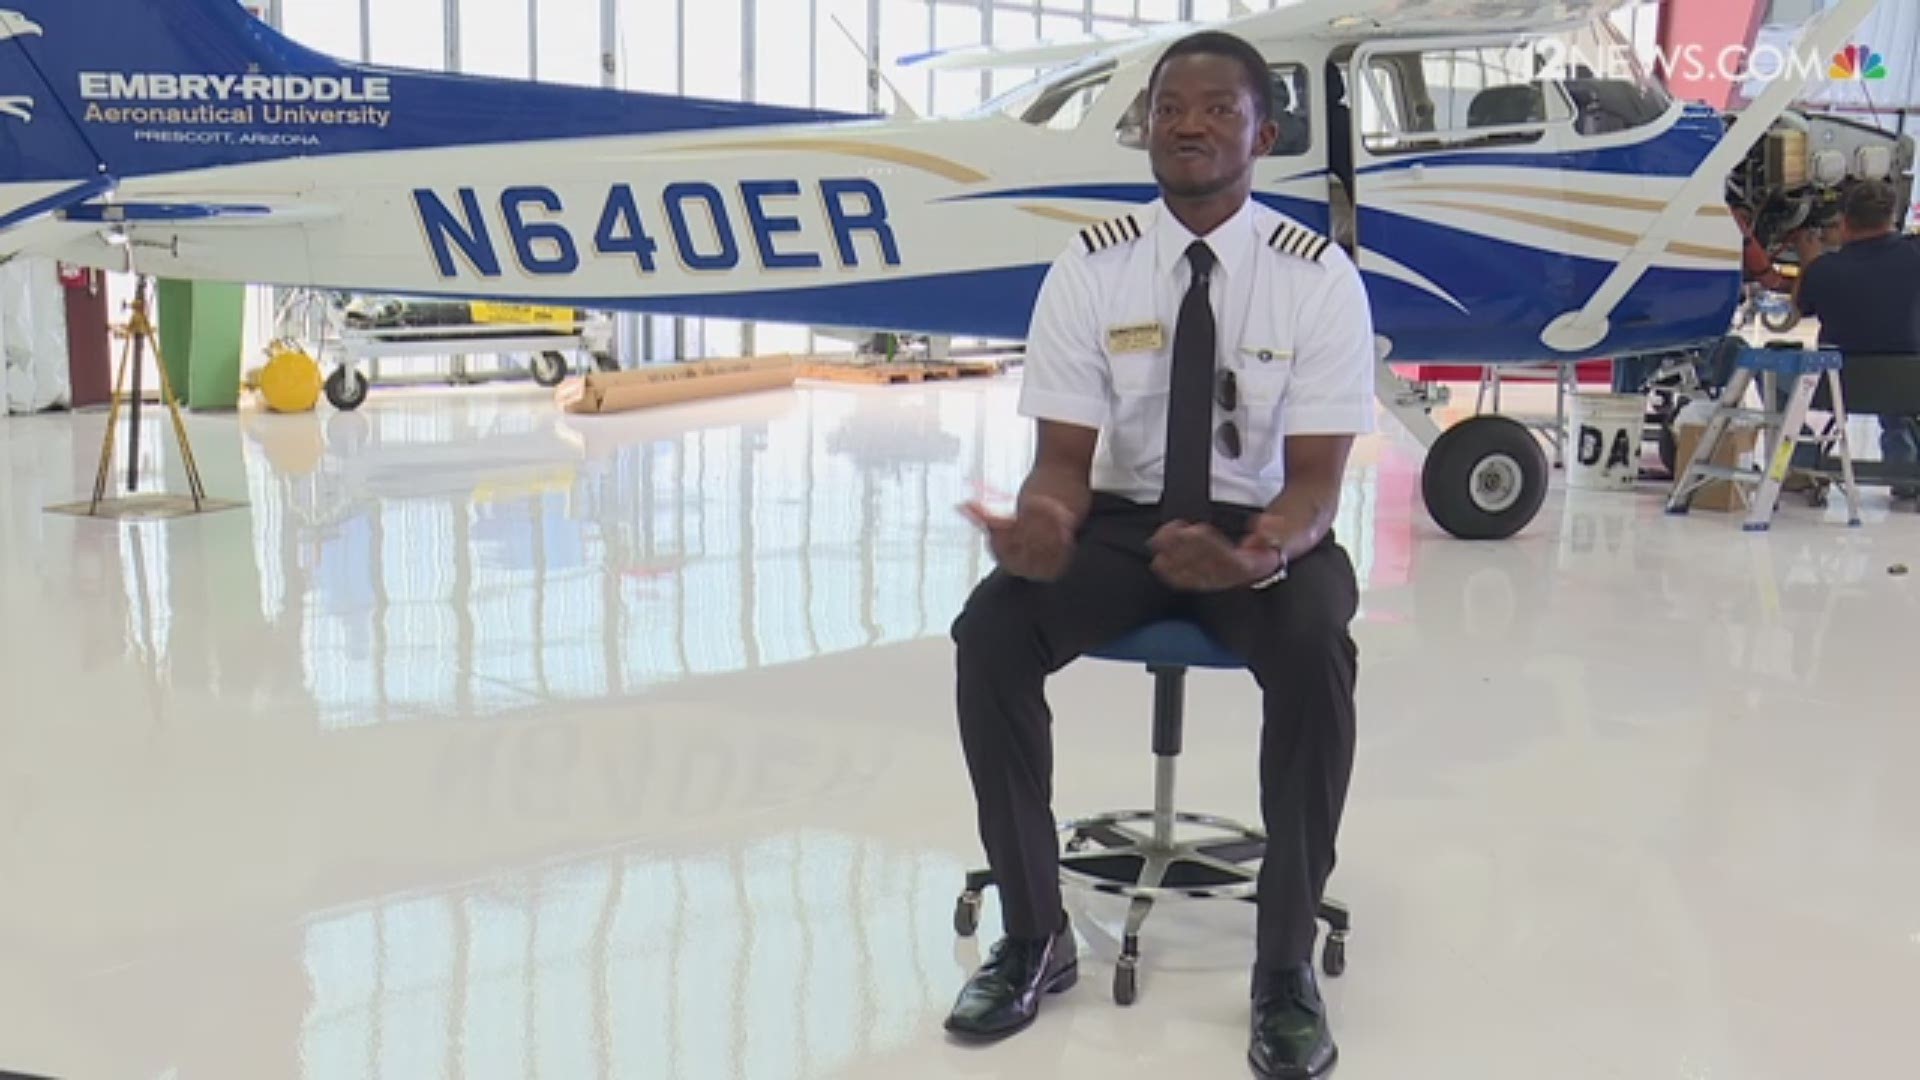 Nigerian EmbryRiddle pilot wins FAA Flight Instructor of the Year